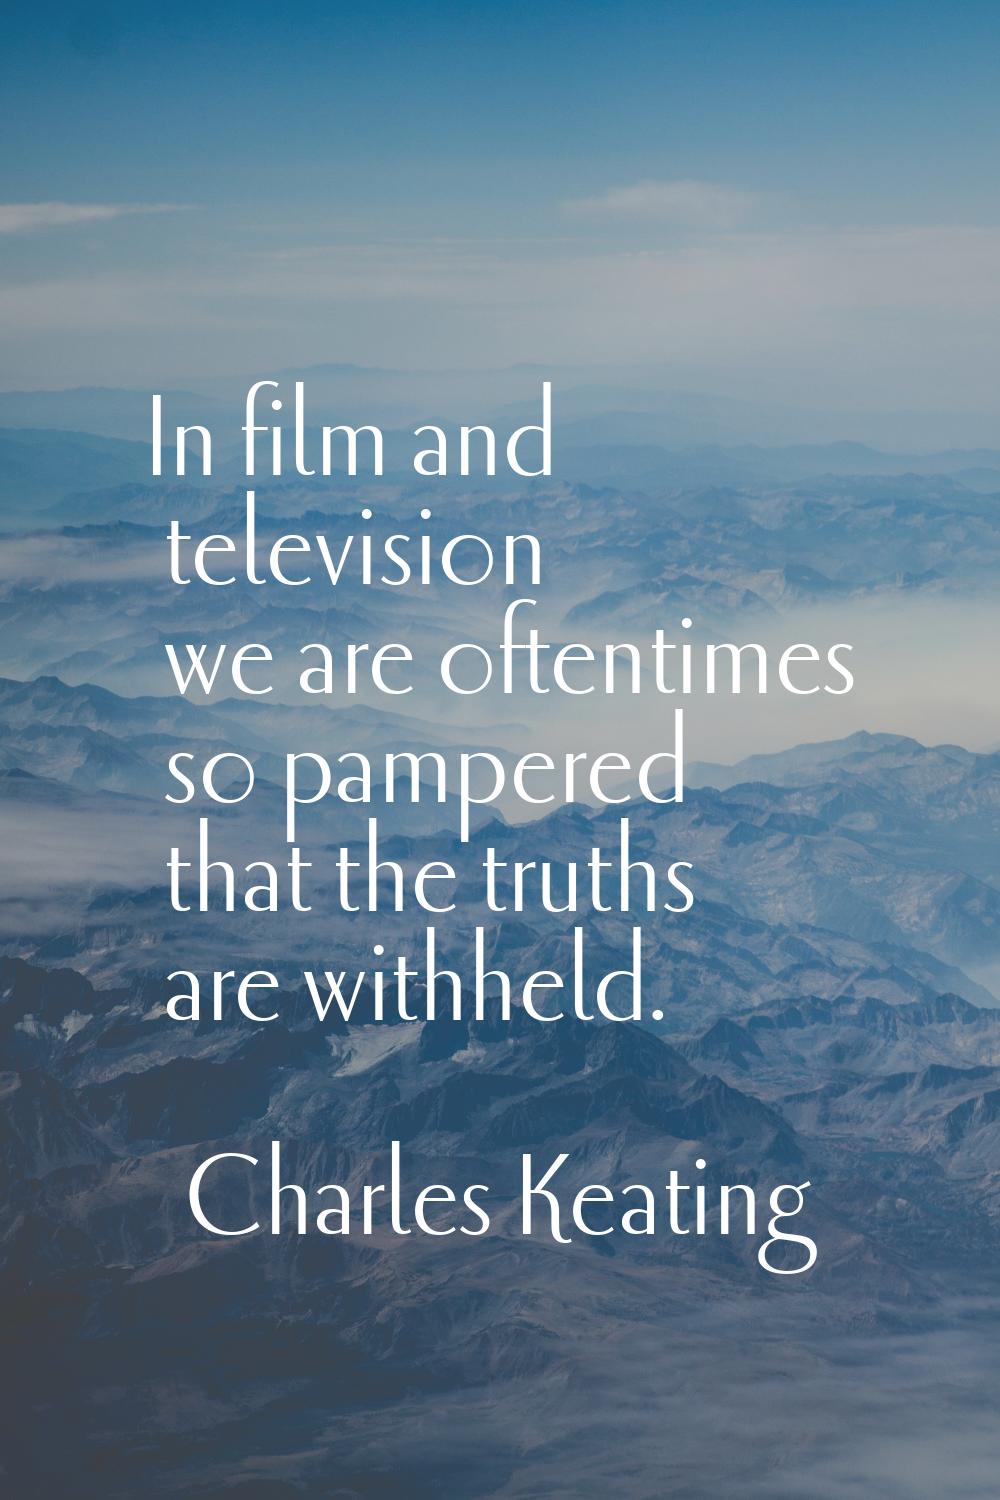 In film and television we are oftentimes so pampered that the truths are withheld.